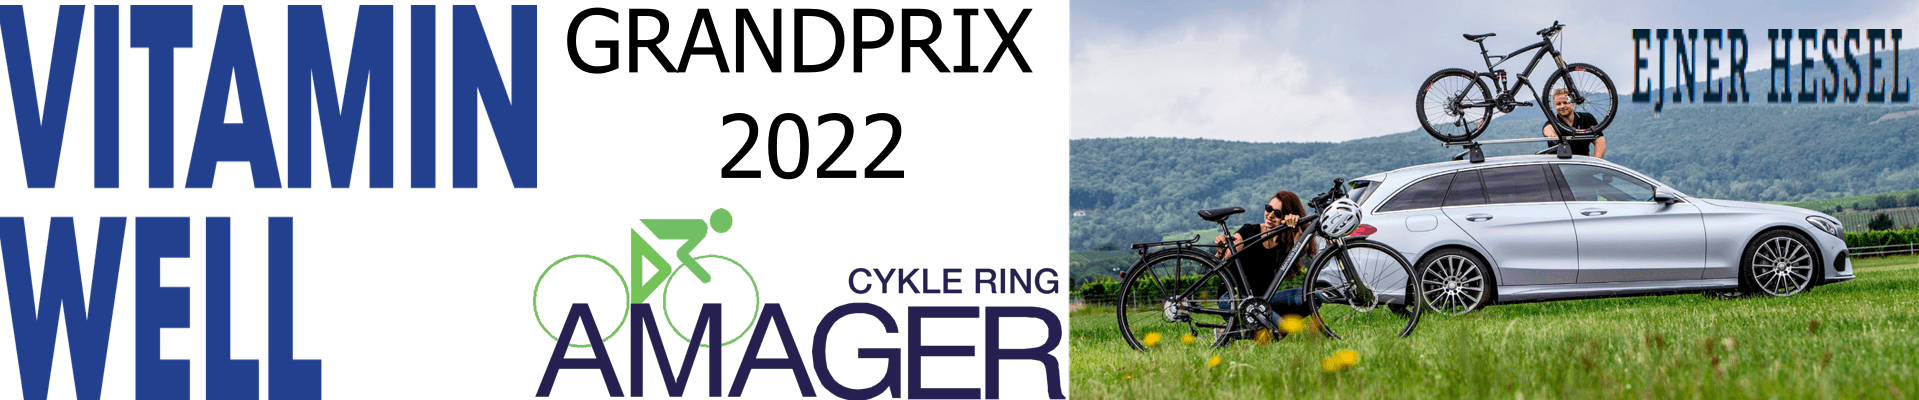 Vitamin Well - Ejner Hessel Grand Prix 2022 -Amager Cykle Ring 